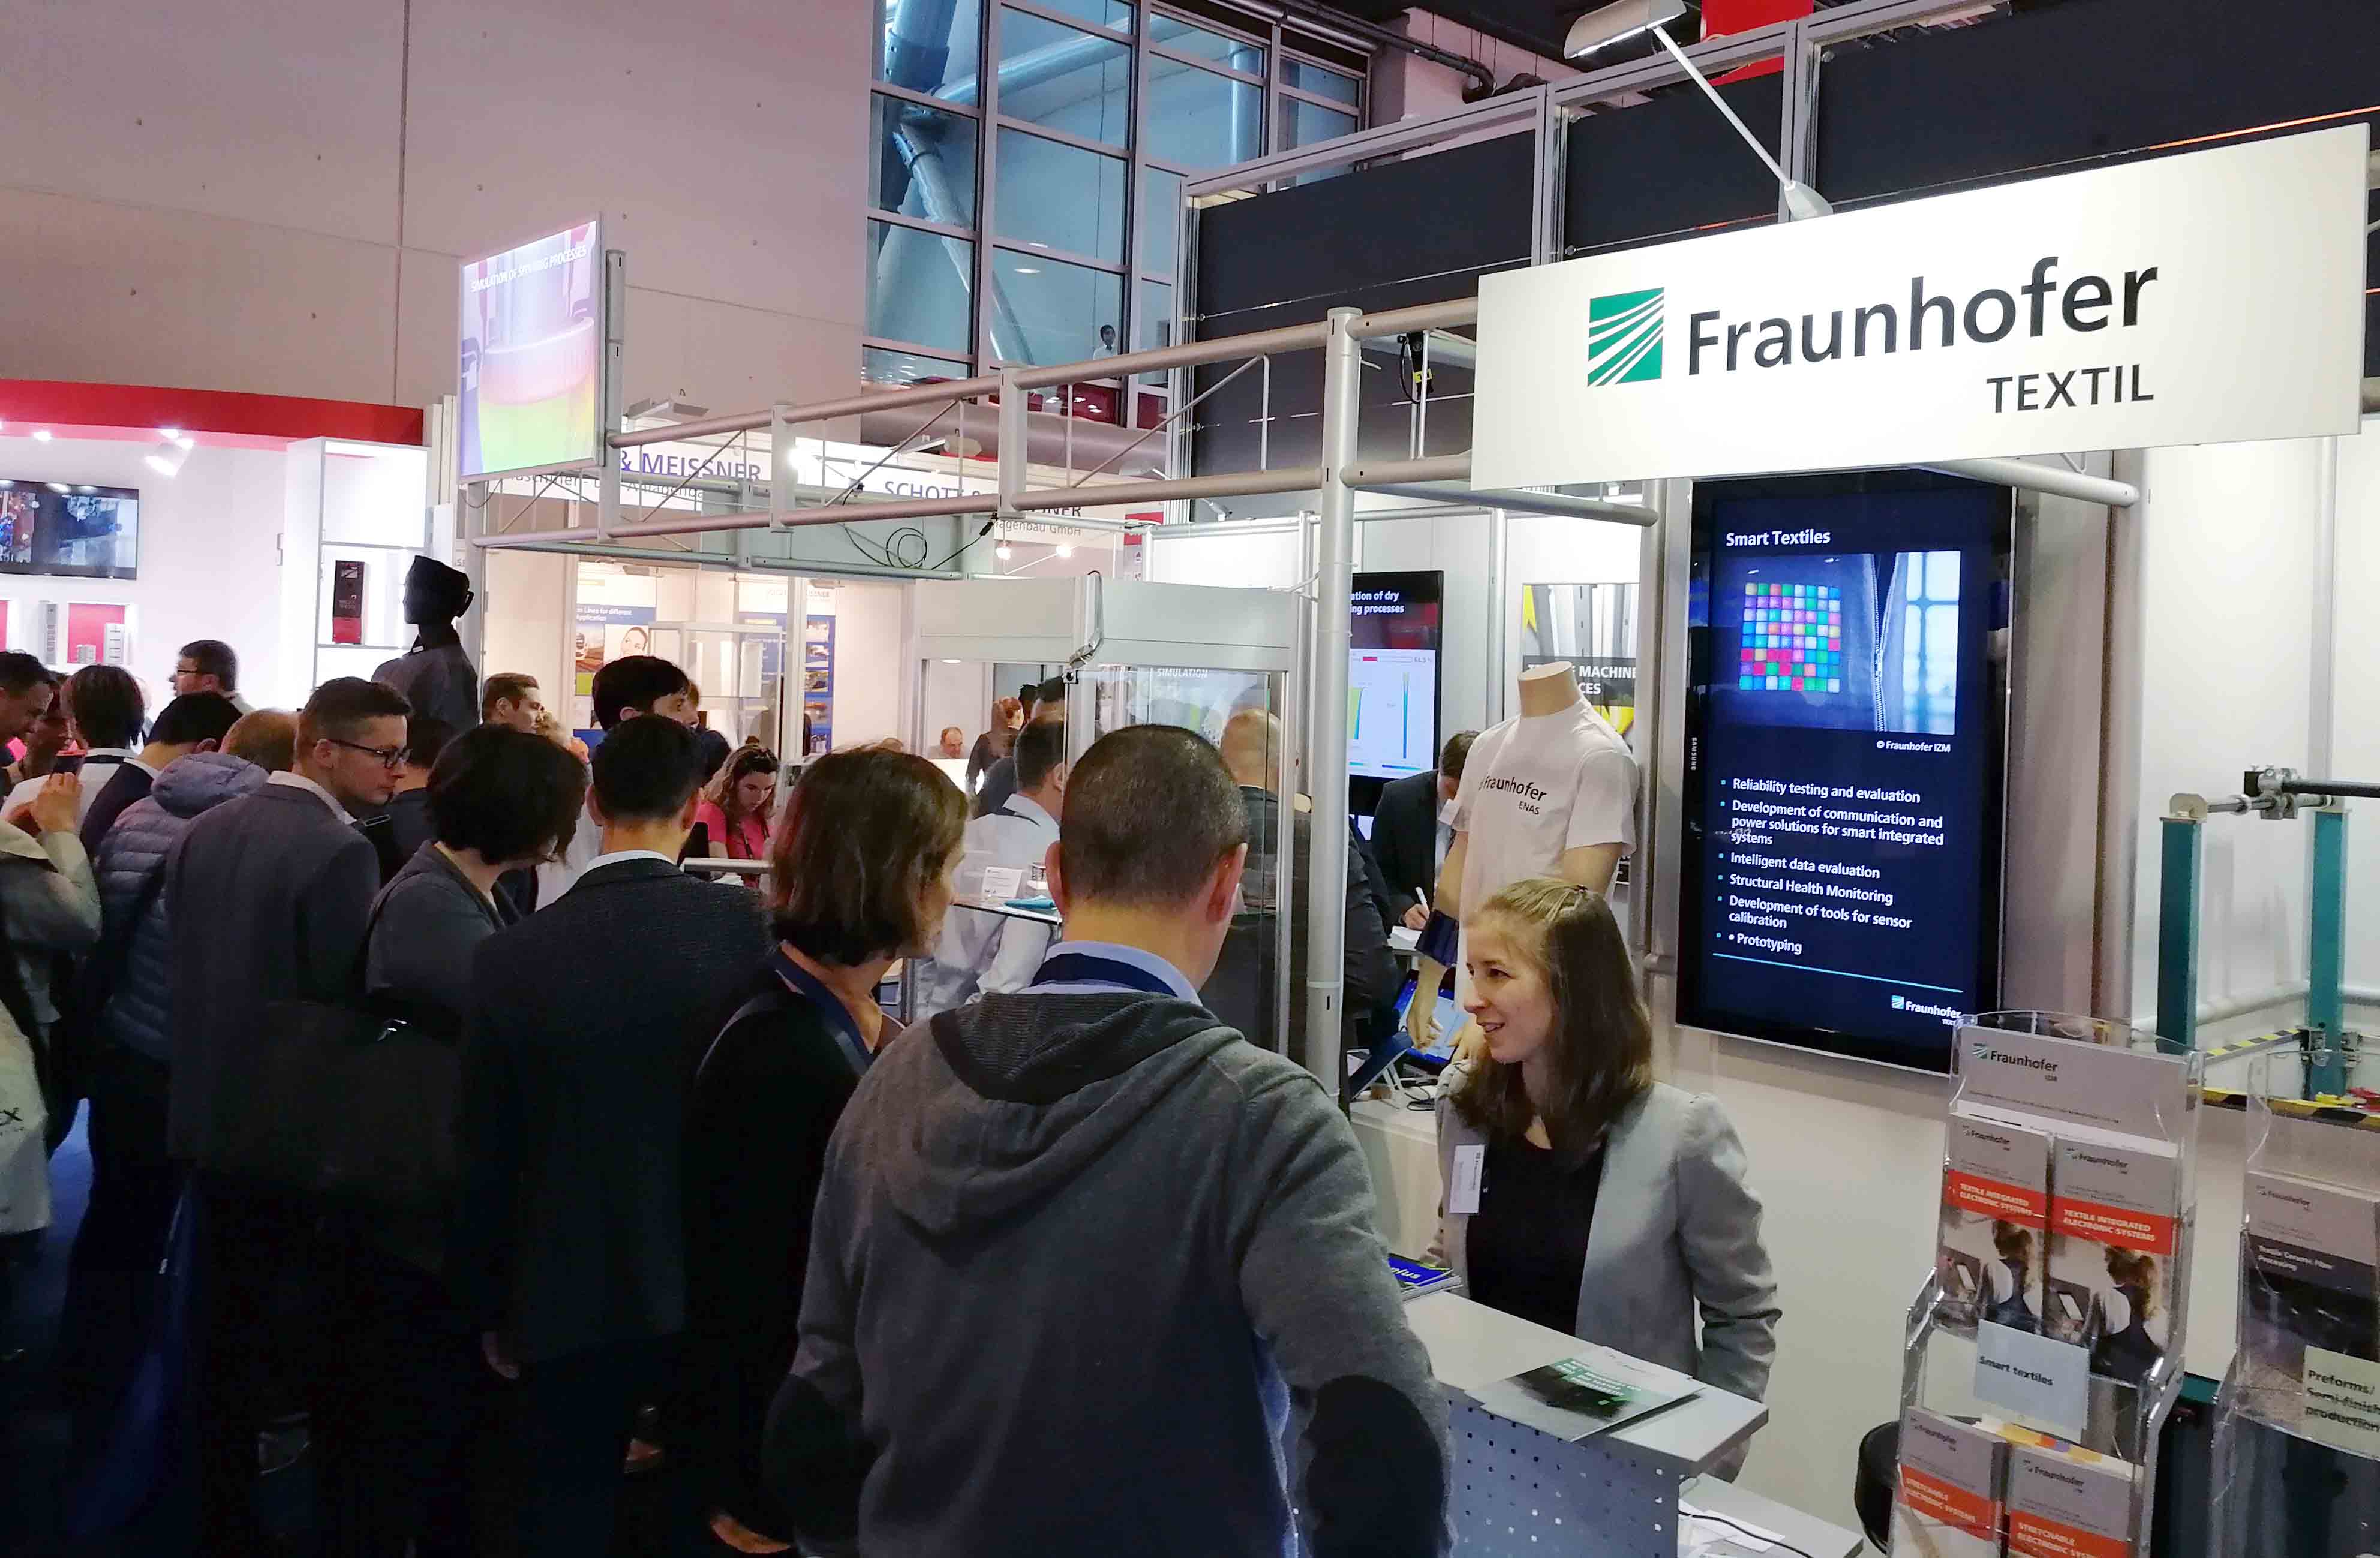 Our experts will present their research at the booth of the Fraunhofer Textile Alliance